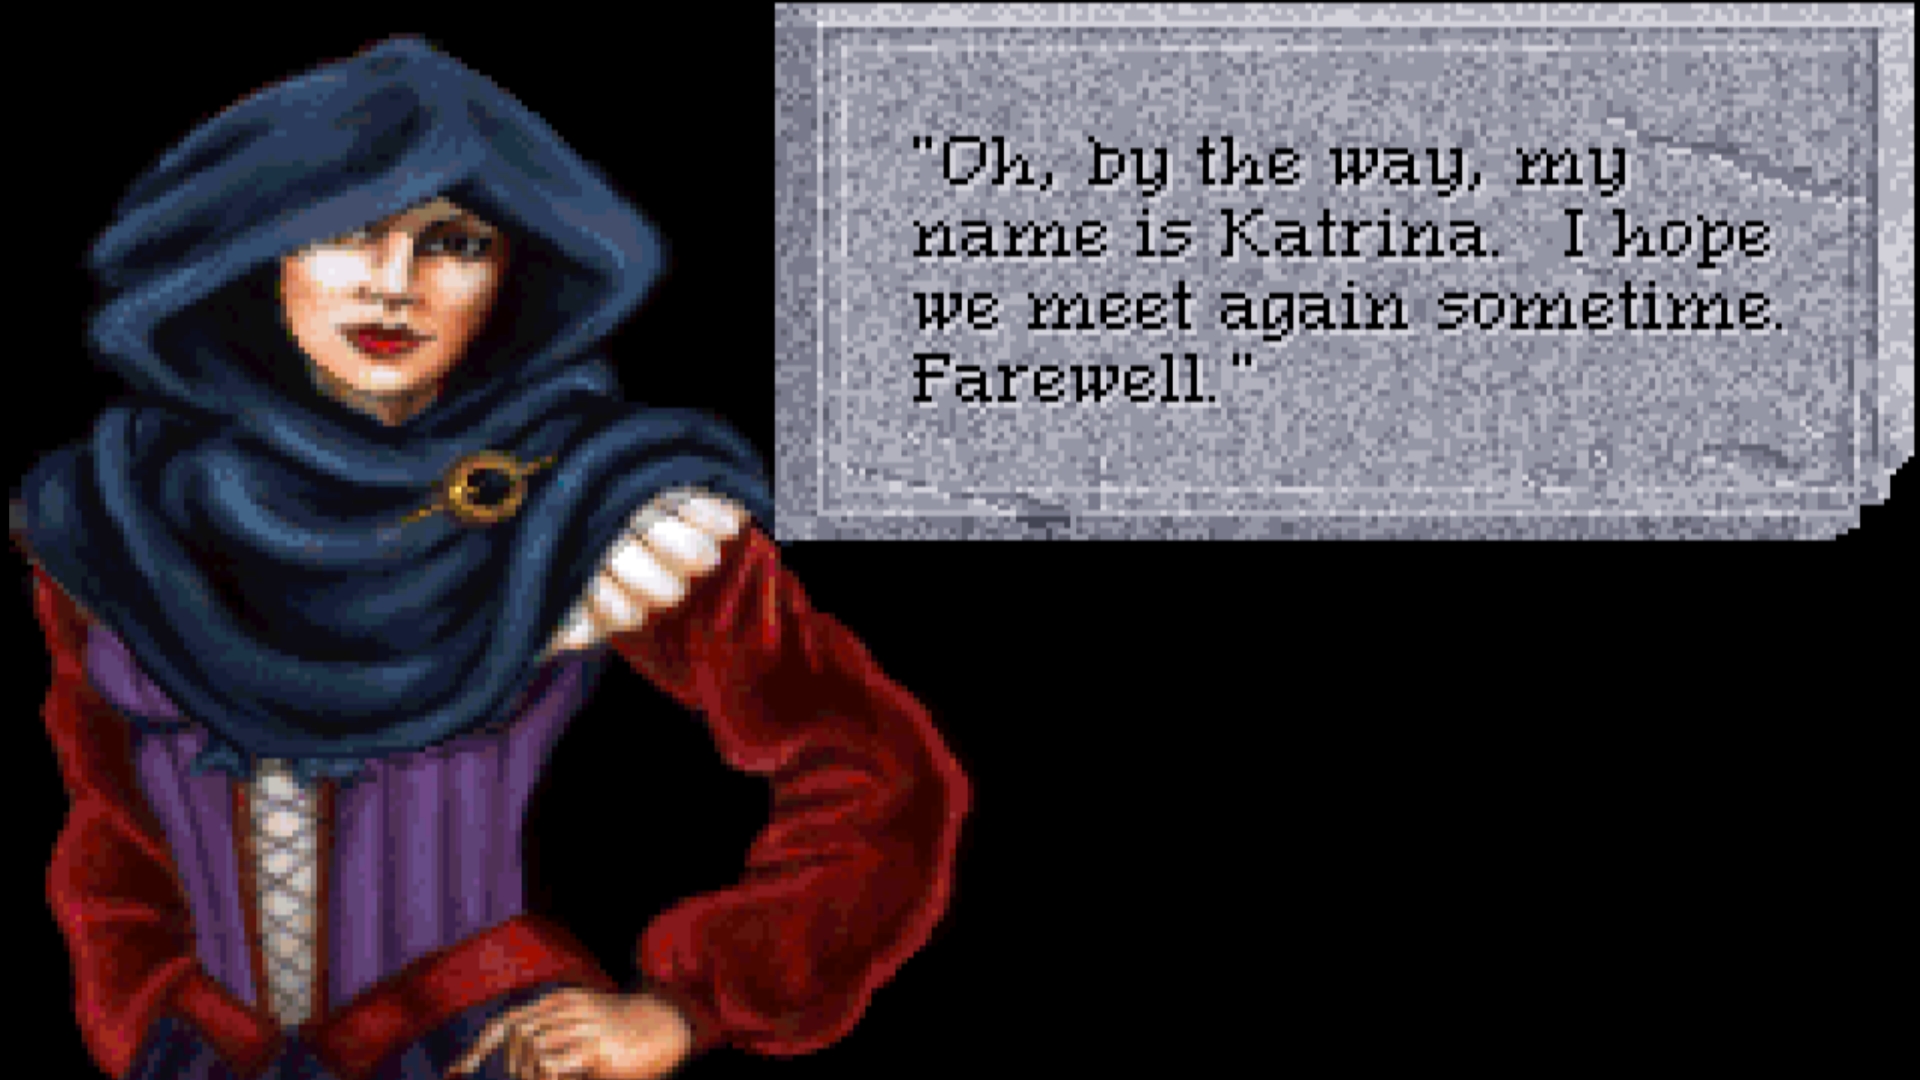 A hooded woman introduces herself as Katrina